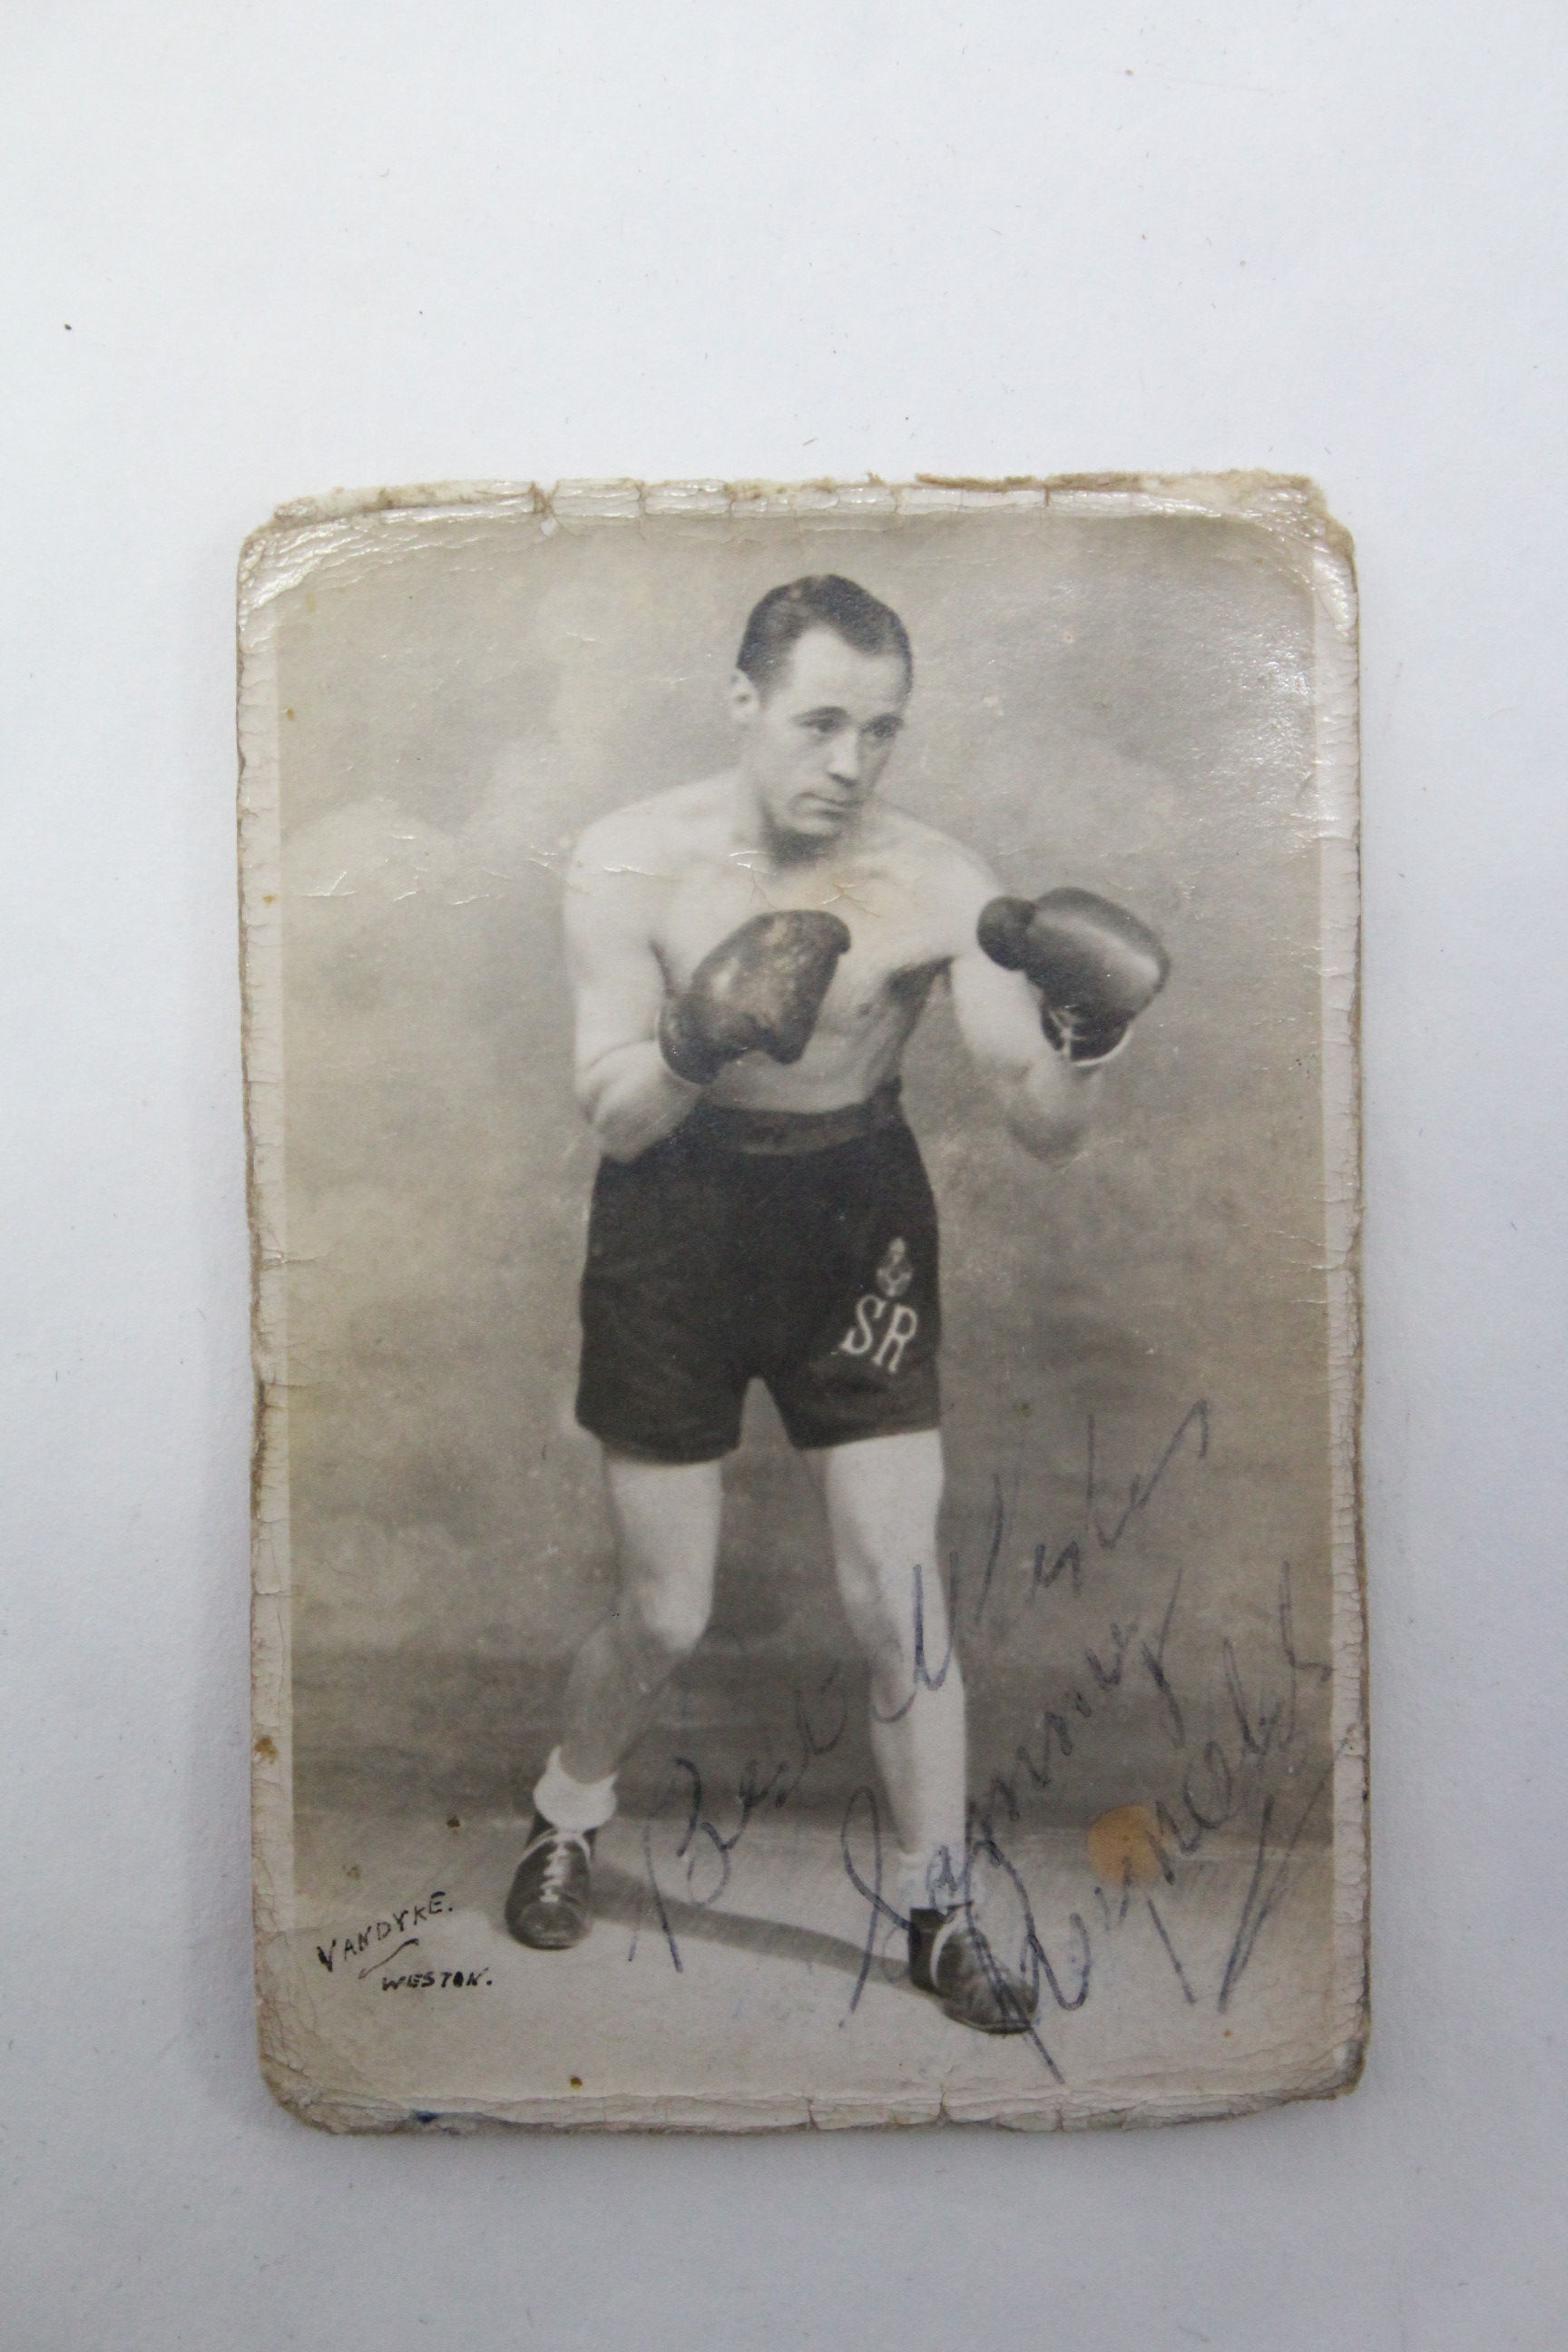 A mid-20th century autographed photograph of the boxer Sammy Reynolds, 3½” x 2¼”, un-framed